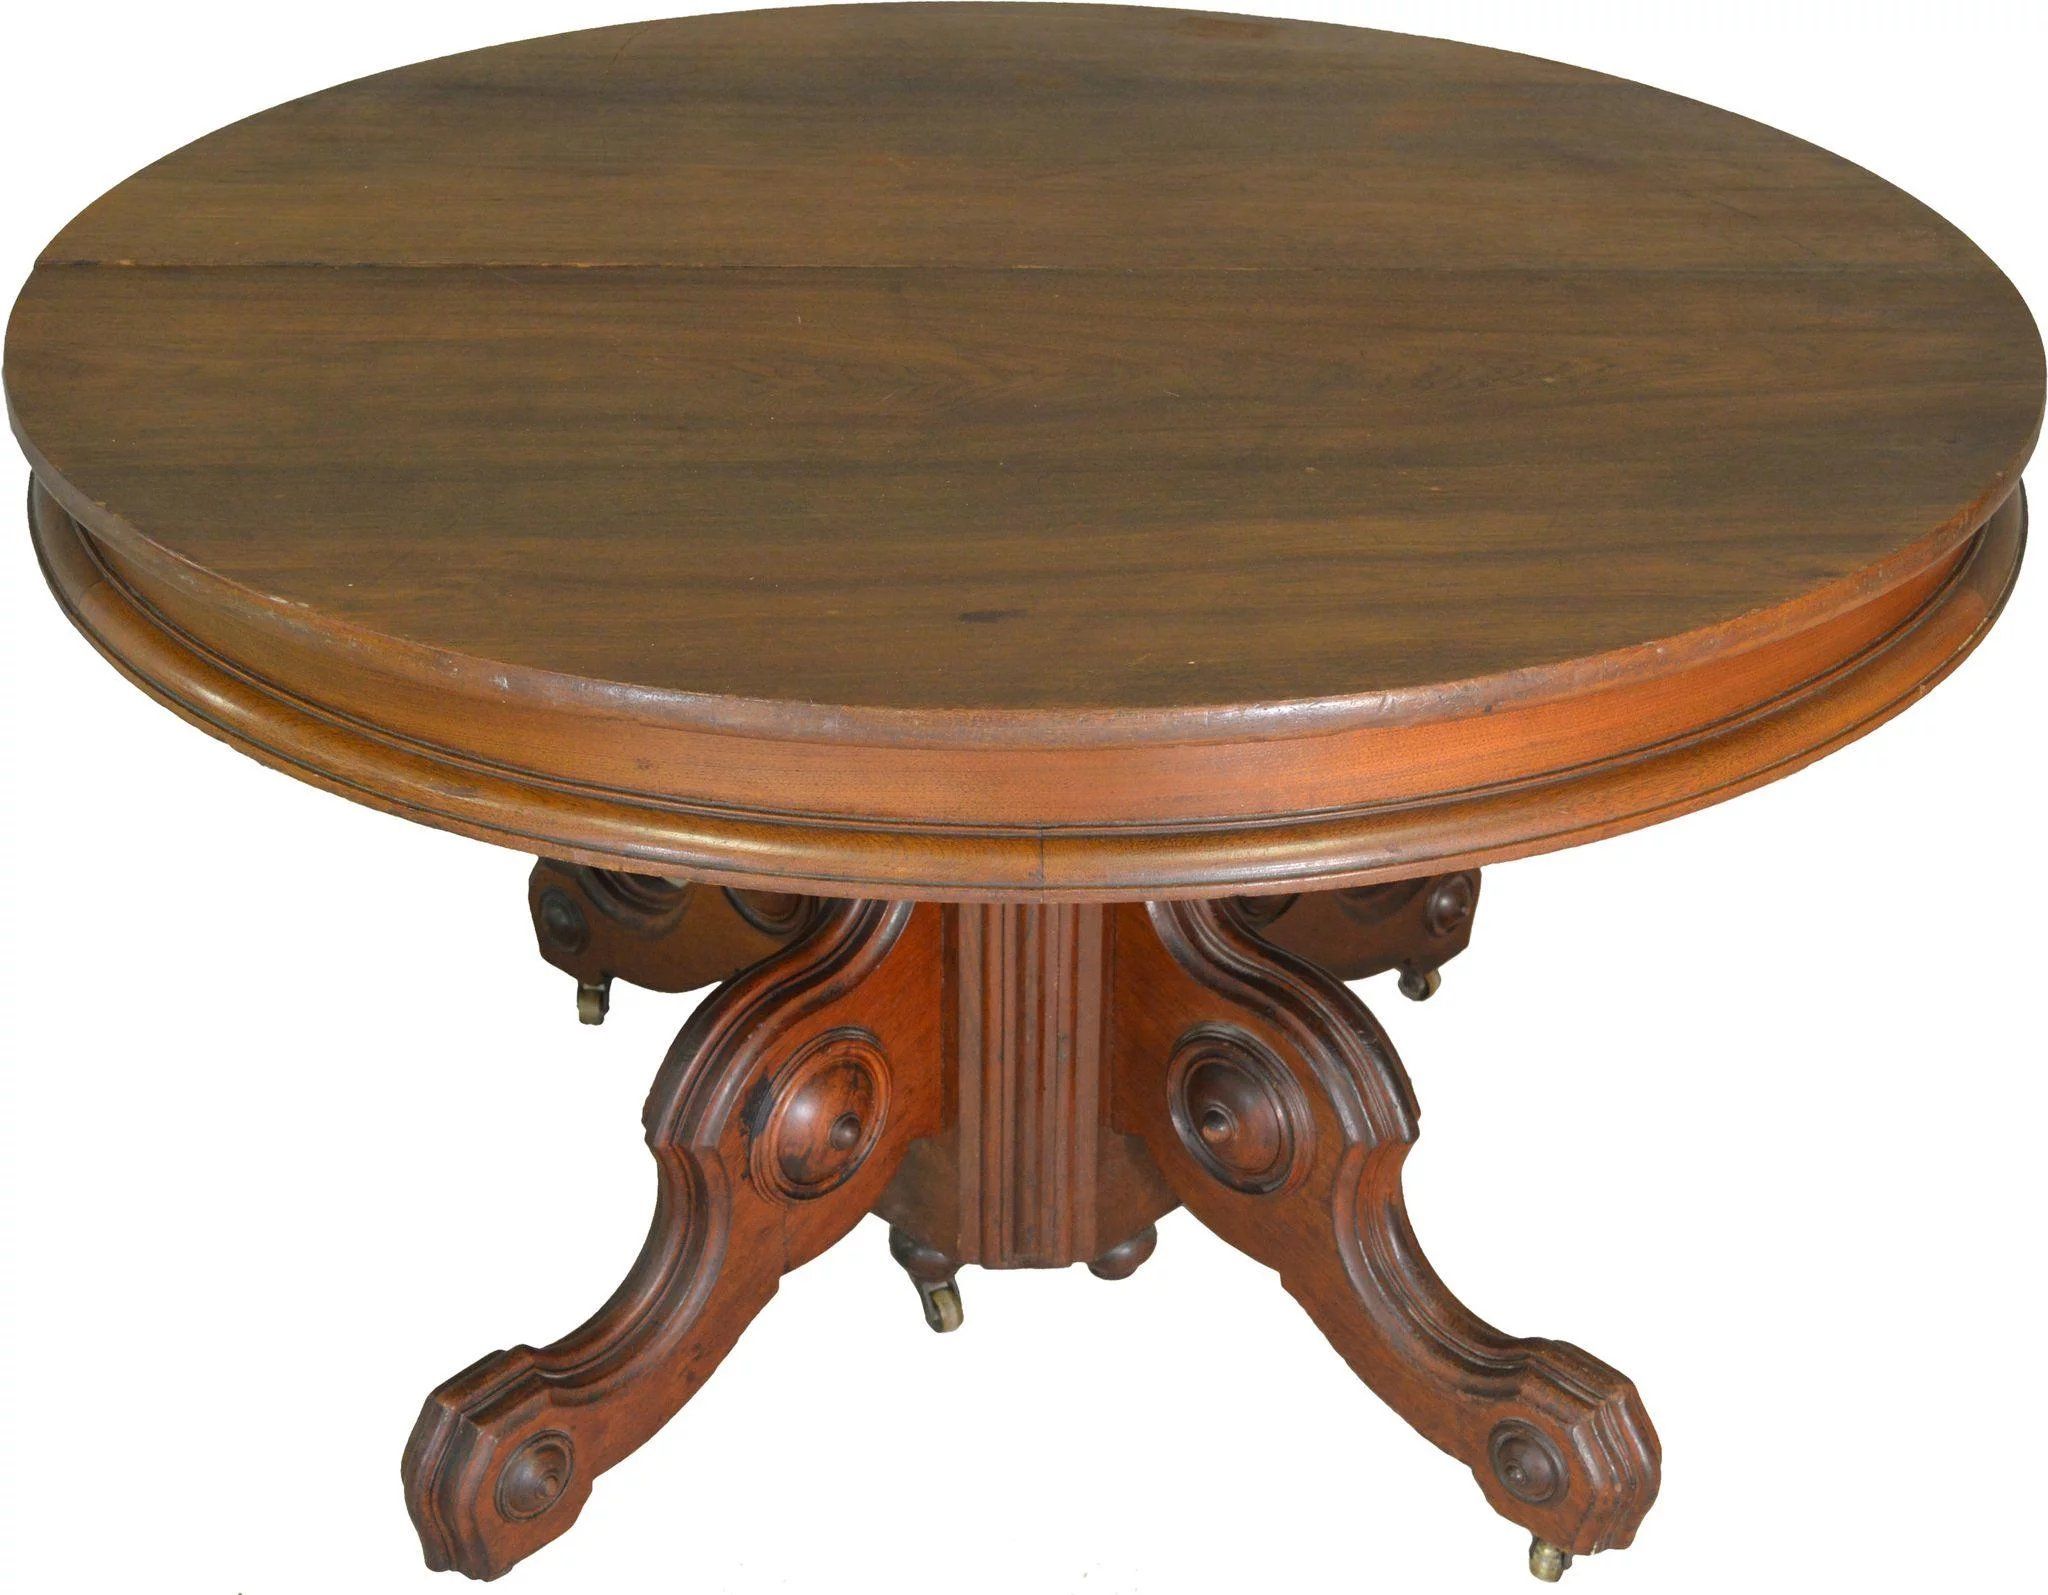 Victorian Round Walnut Dining Table : Maine Antique Pertaining To 2017 Vintage Brown Round Dining Tables (View 3 of 15)